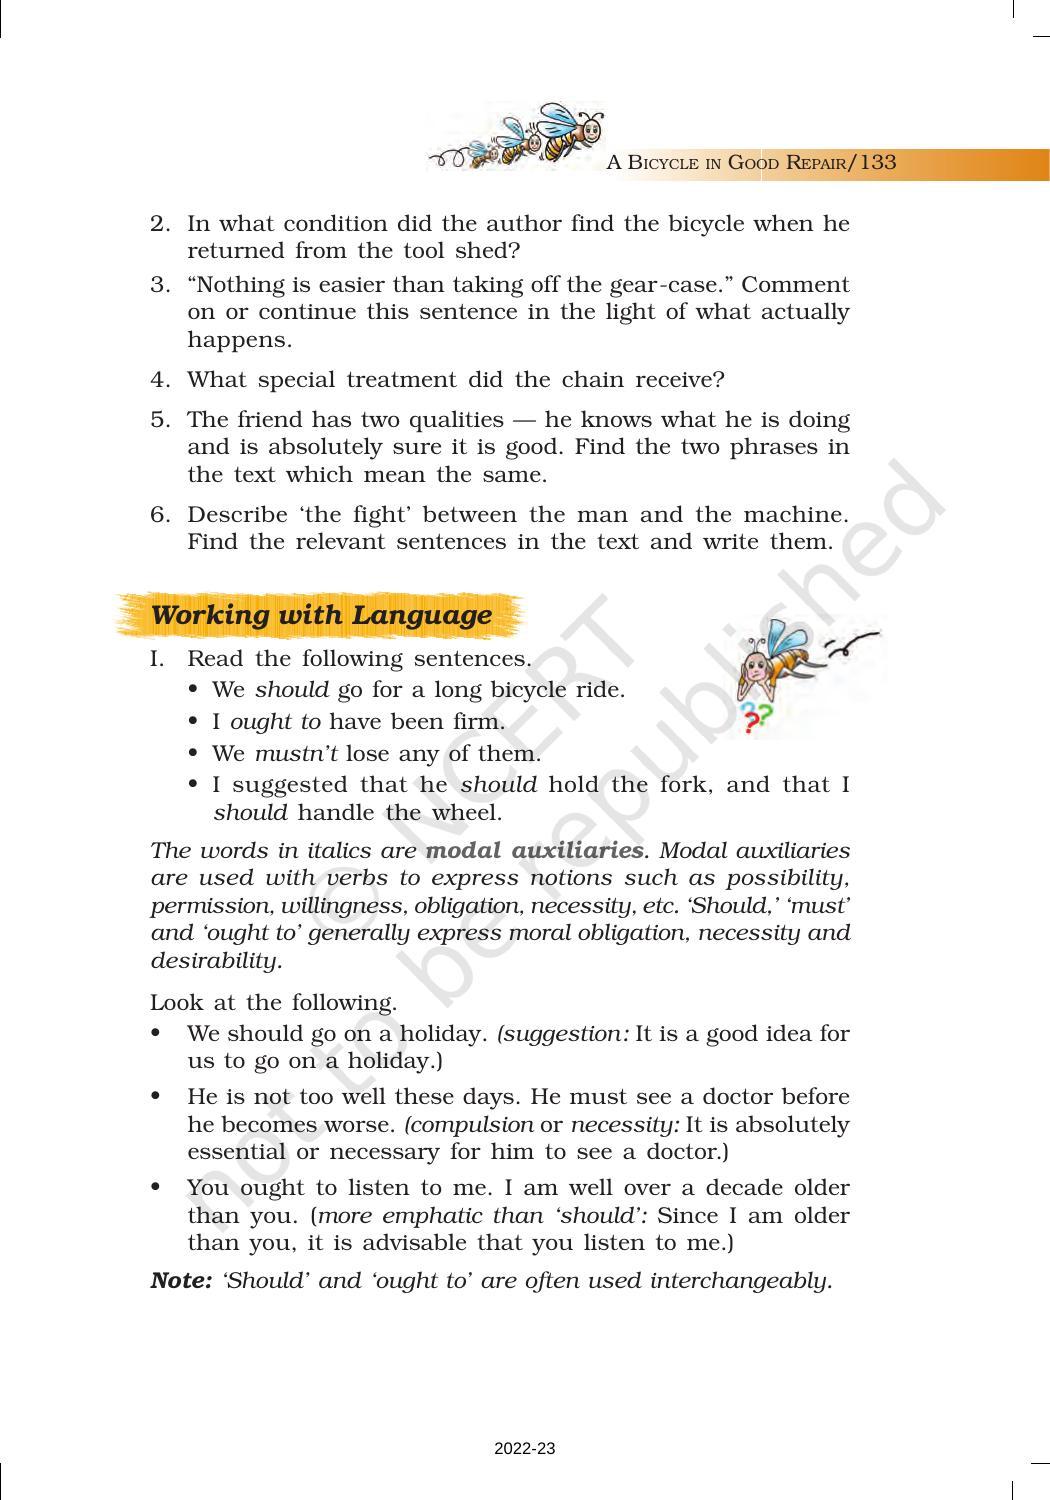 NCERT Book for Class 7 English (Honeycomb): Chapter 9-A Bicycle in Good Repair - Page 8